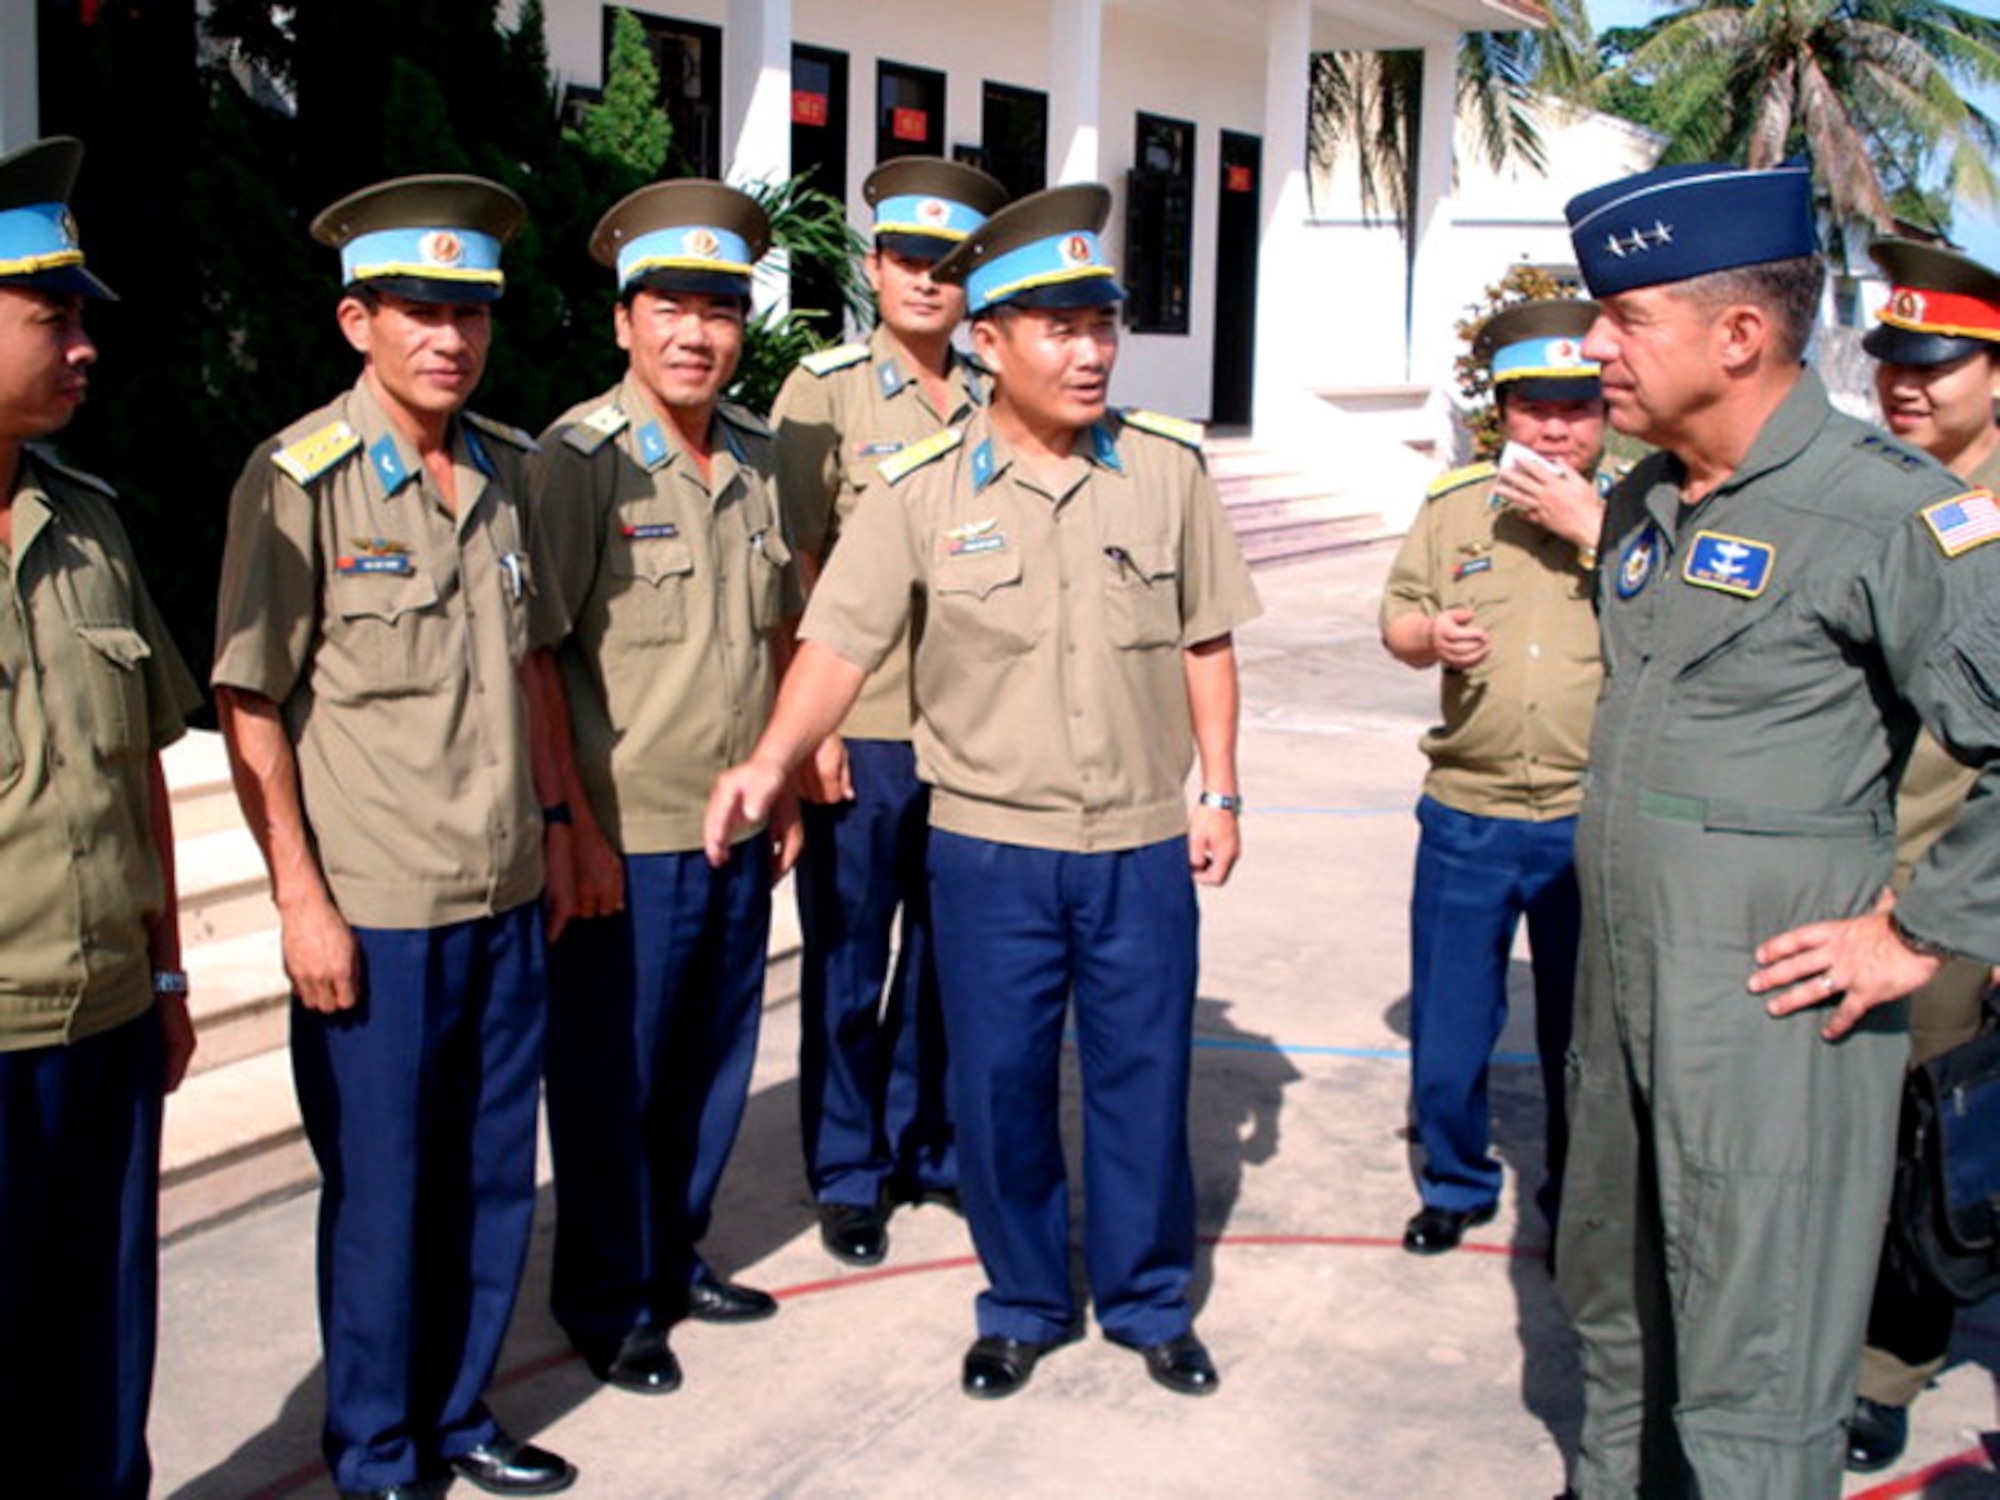 Lt. Gen. Dan Leaf discusses pilot training with staff instructors during a visit to the Vietnamese air force academy at Nha Trang Air Base located in the Khanh Hoa province on the central coast.  General Leaf was in Vietnam to meet with military and civilian officials to identify possible future military engagement activities.  (U.S. Air Force photo)